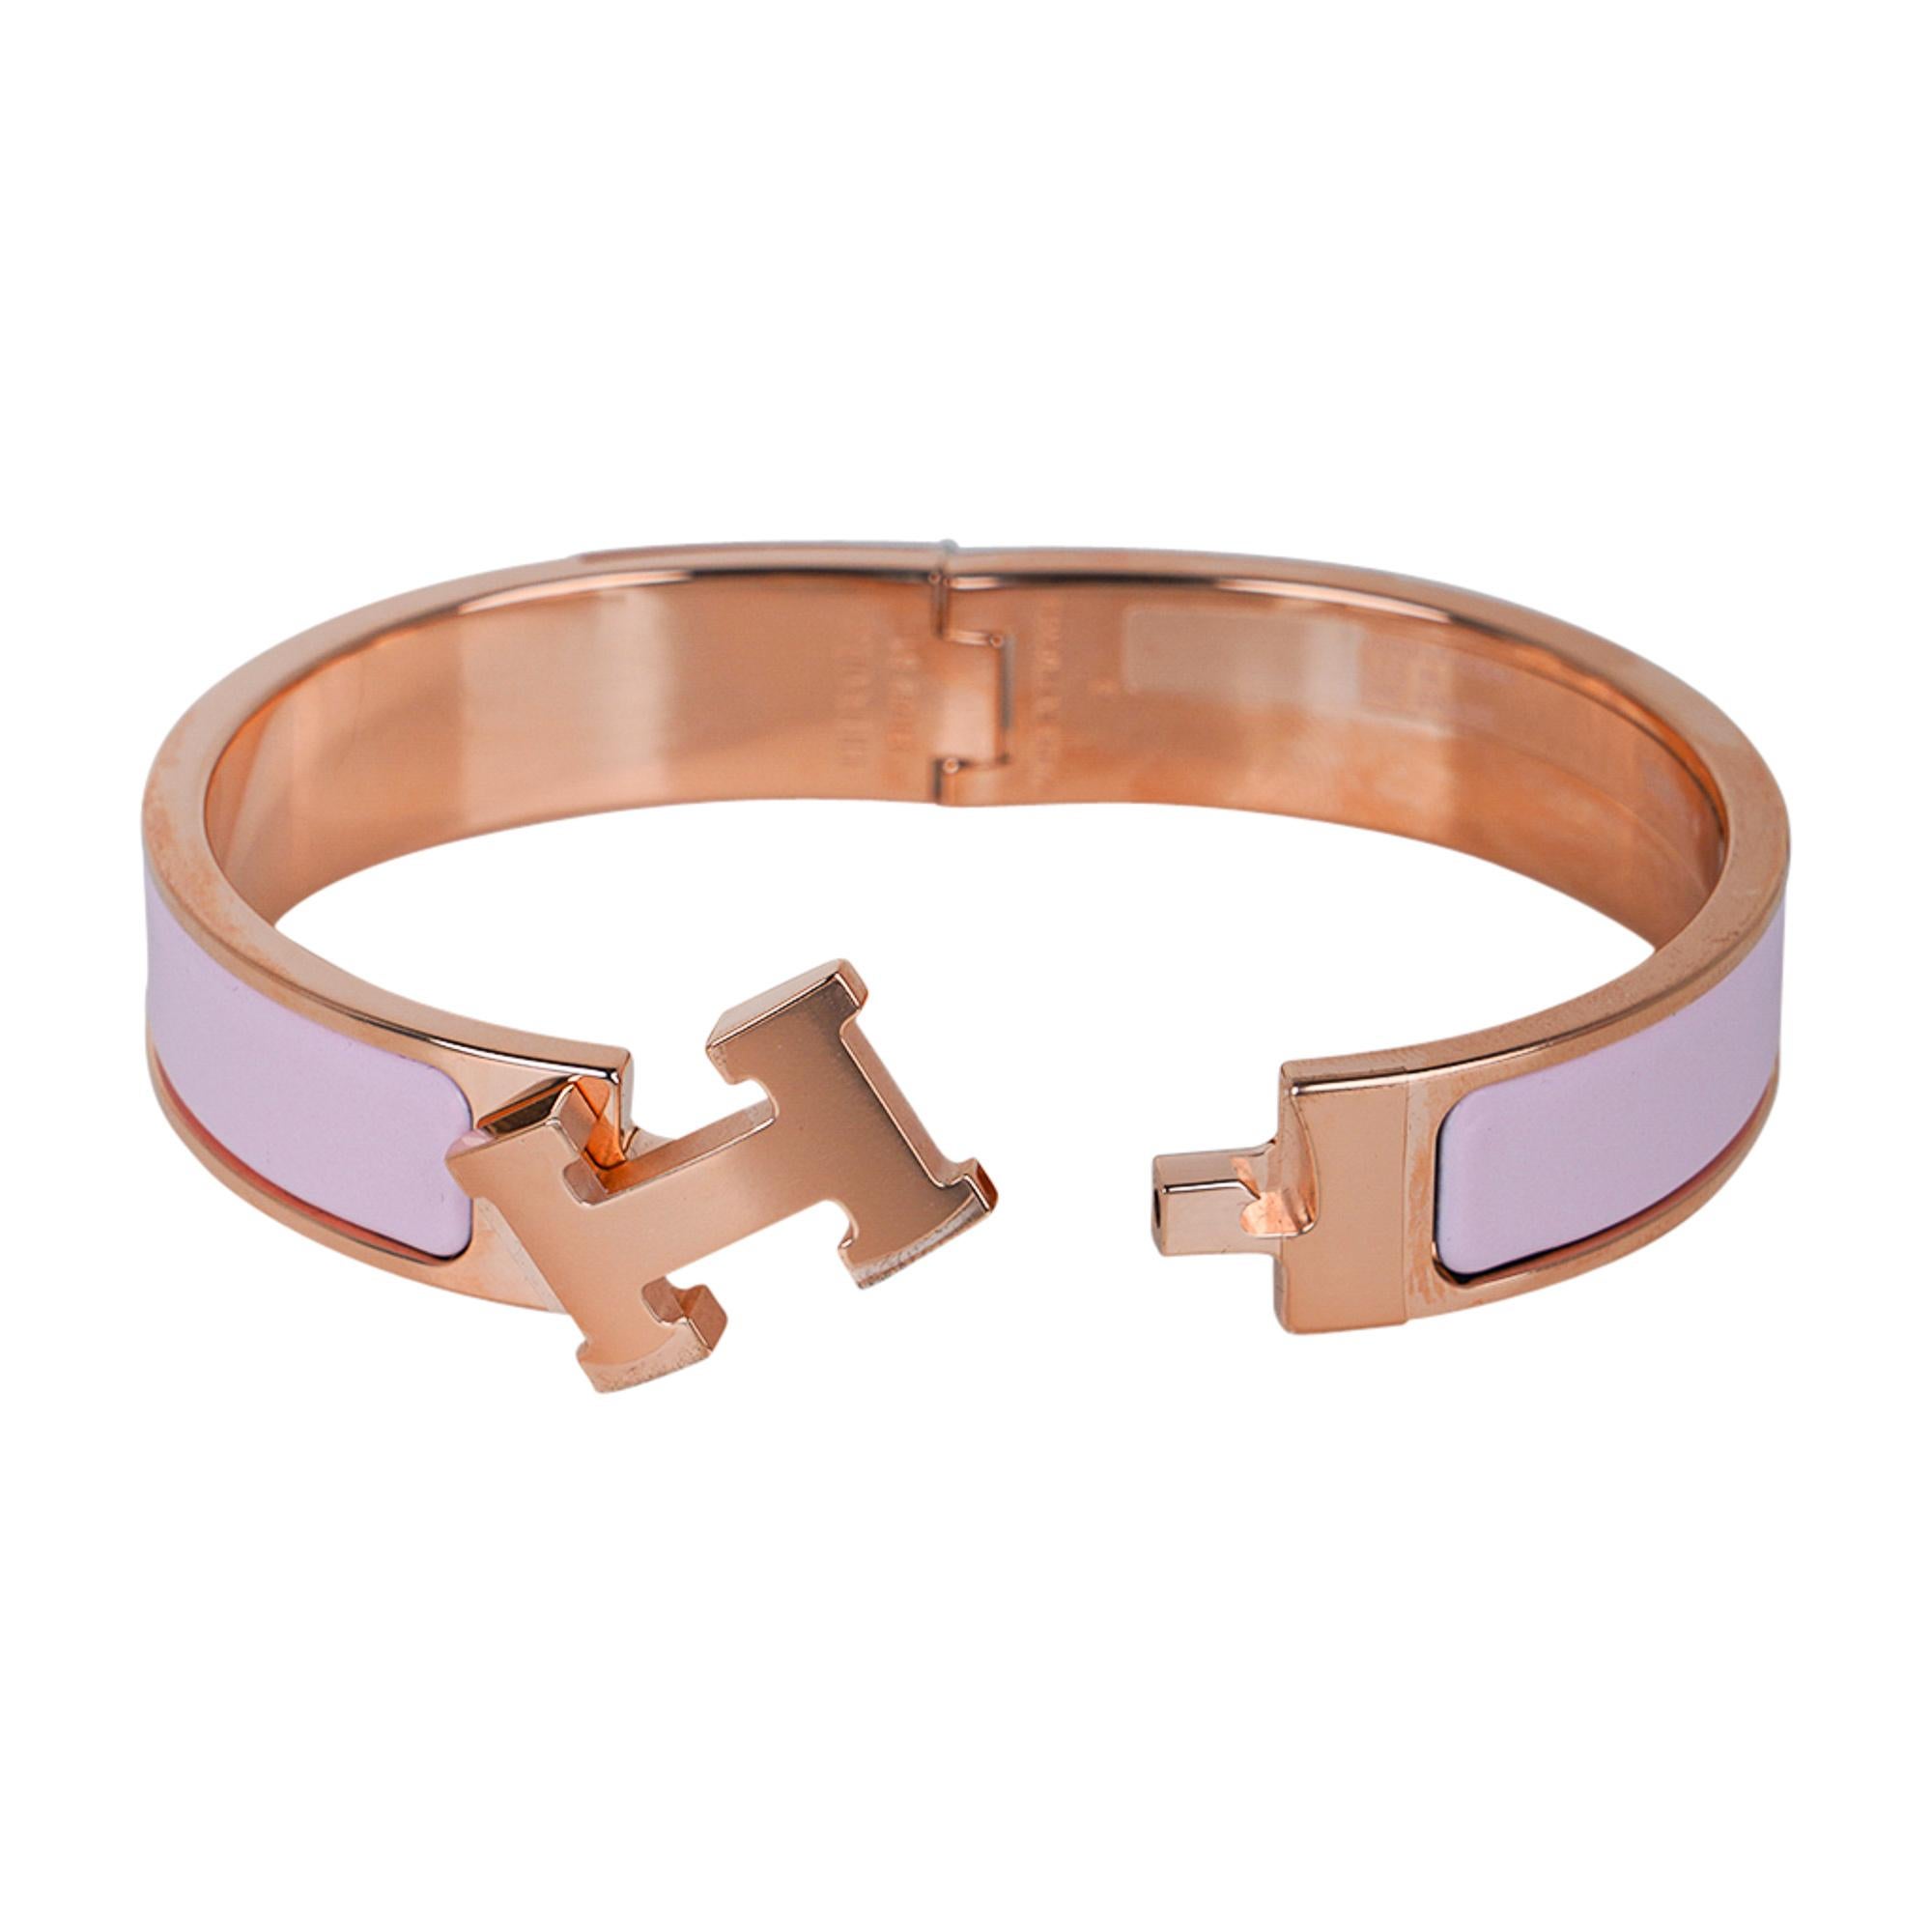 Hermes Rose Dragee Clic Clac H schmales Emaille-Armband Roségold PM im Zustand „Neu“ im Angebot in Miami, FL